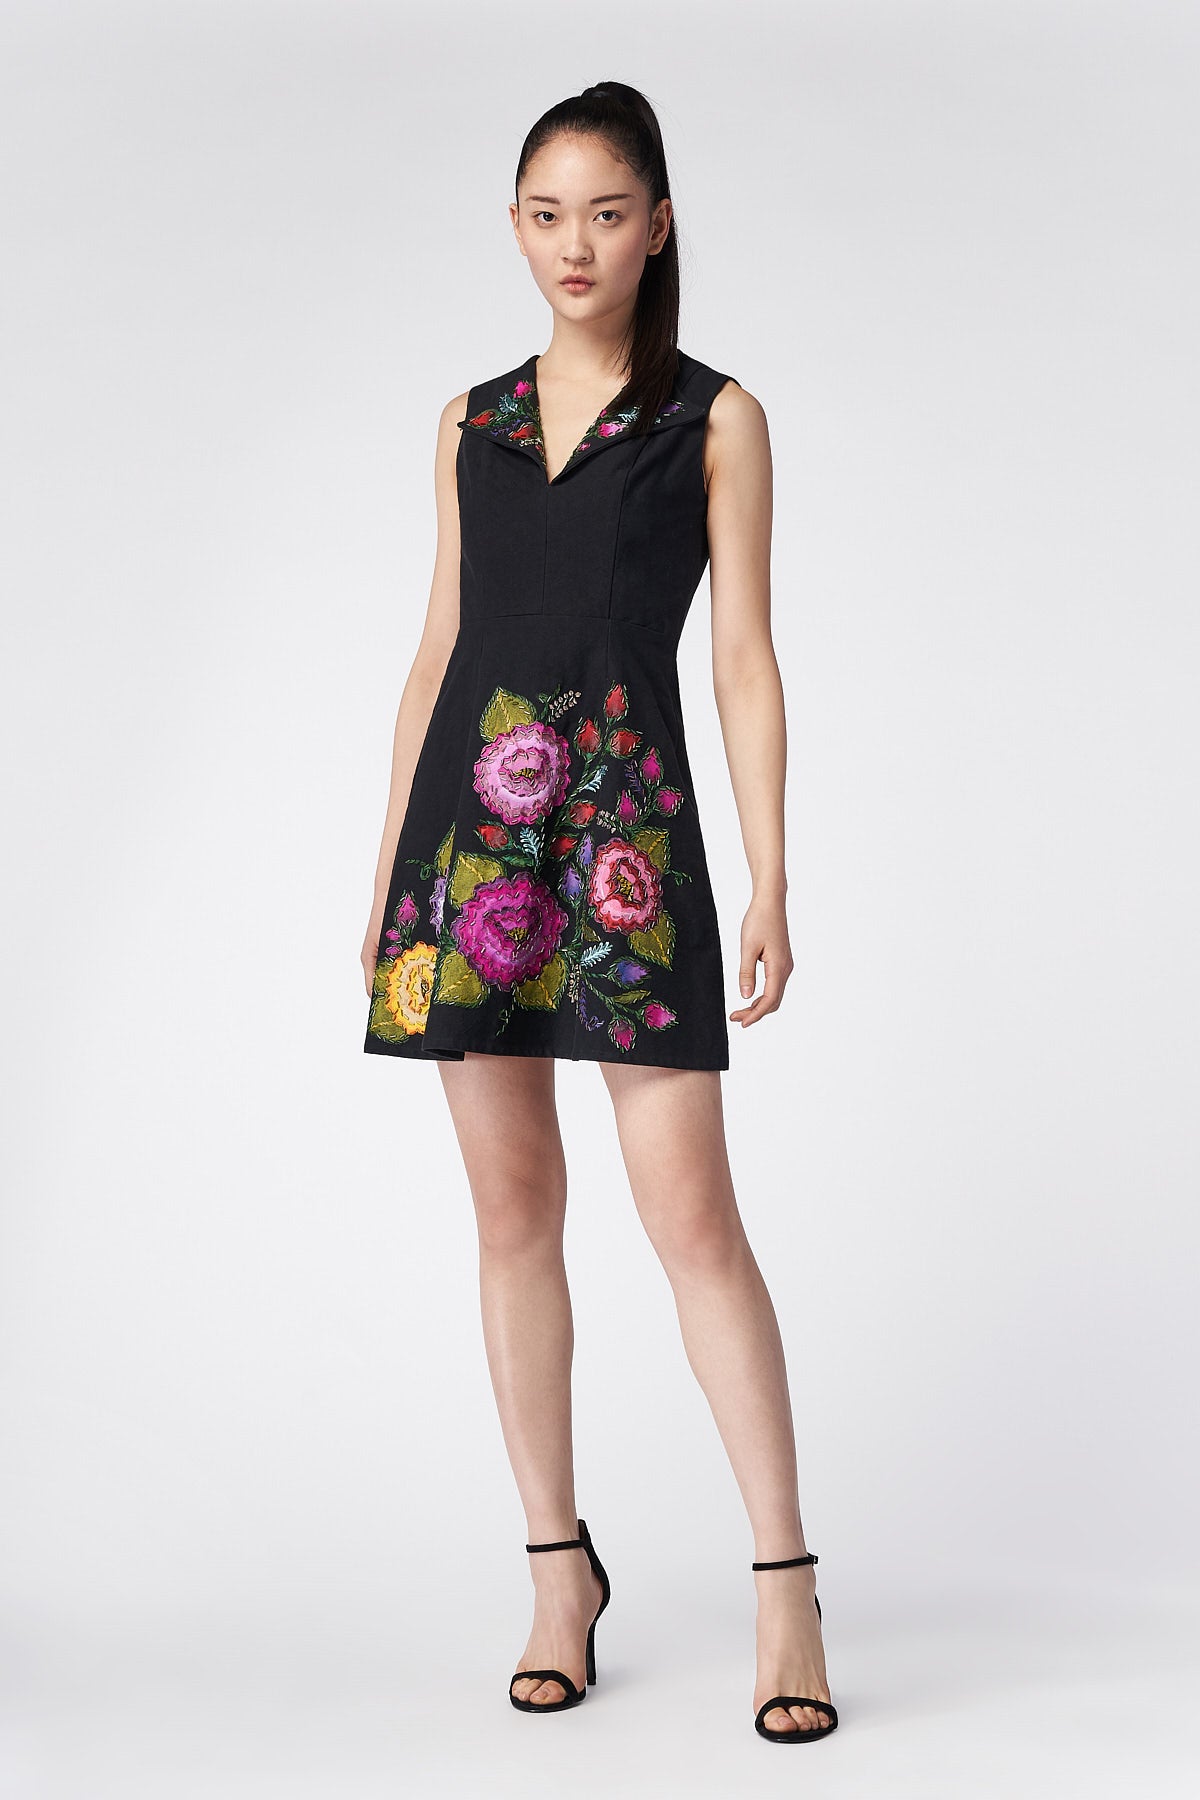 HAND-PAINTED AND HAND-EMBROIDERED BELL-SHAPED SHORT DRESS